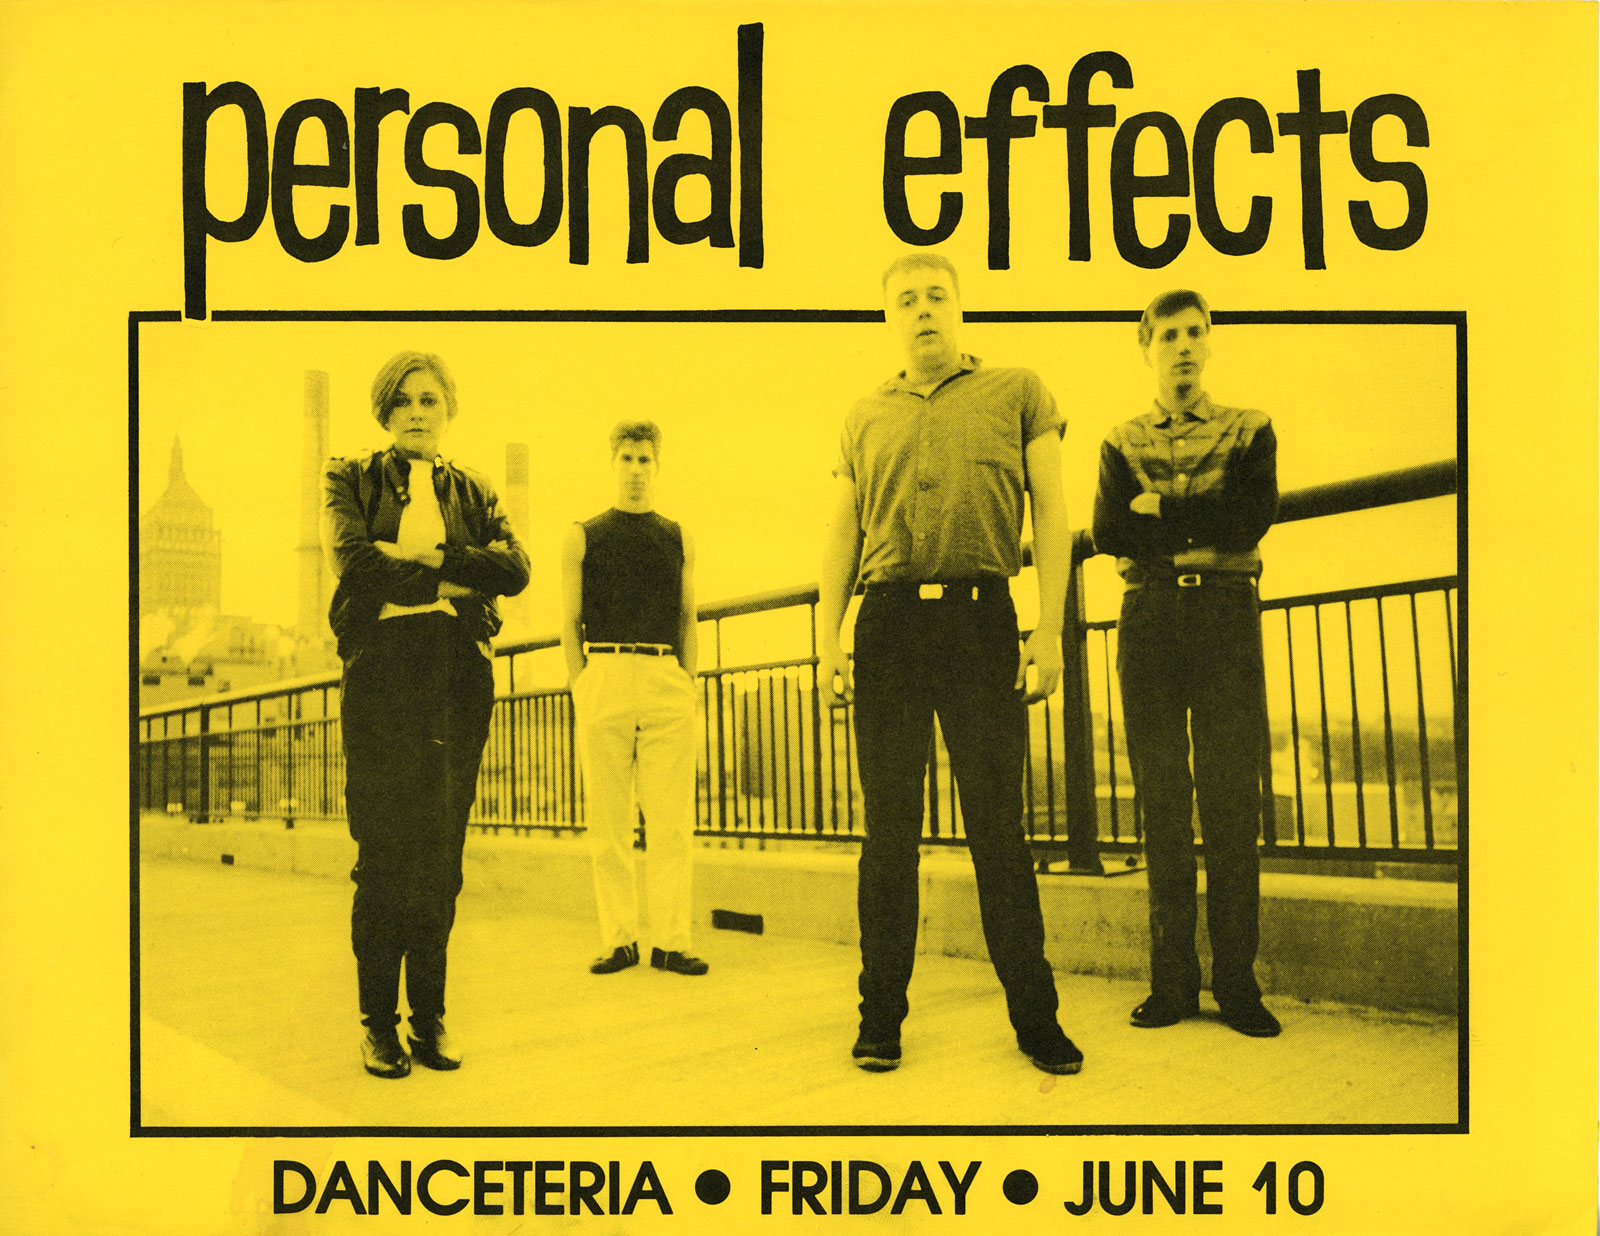 Poster for Personal Effects at Danceteria in New York City 06.10.1983